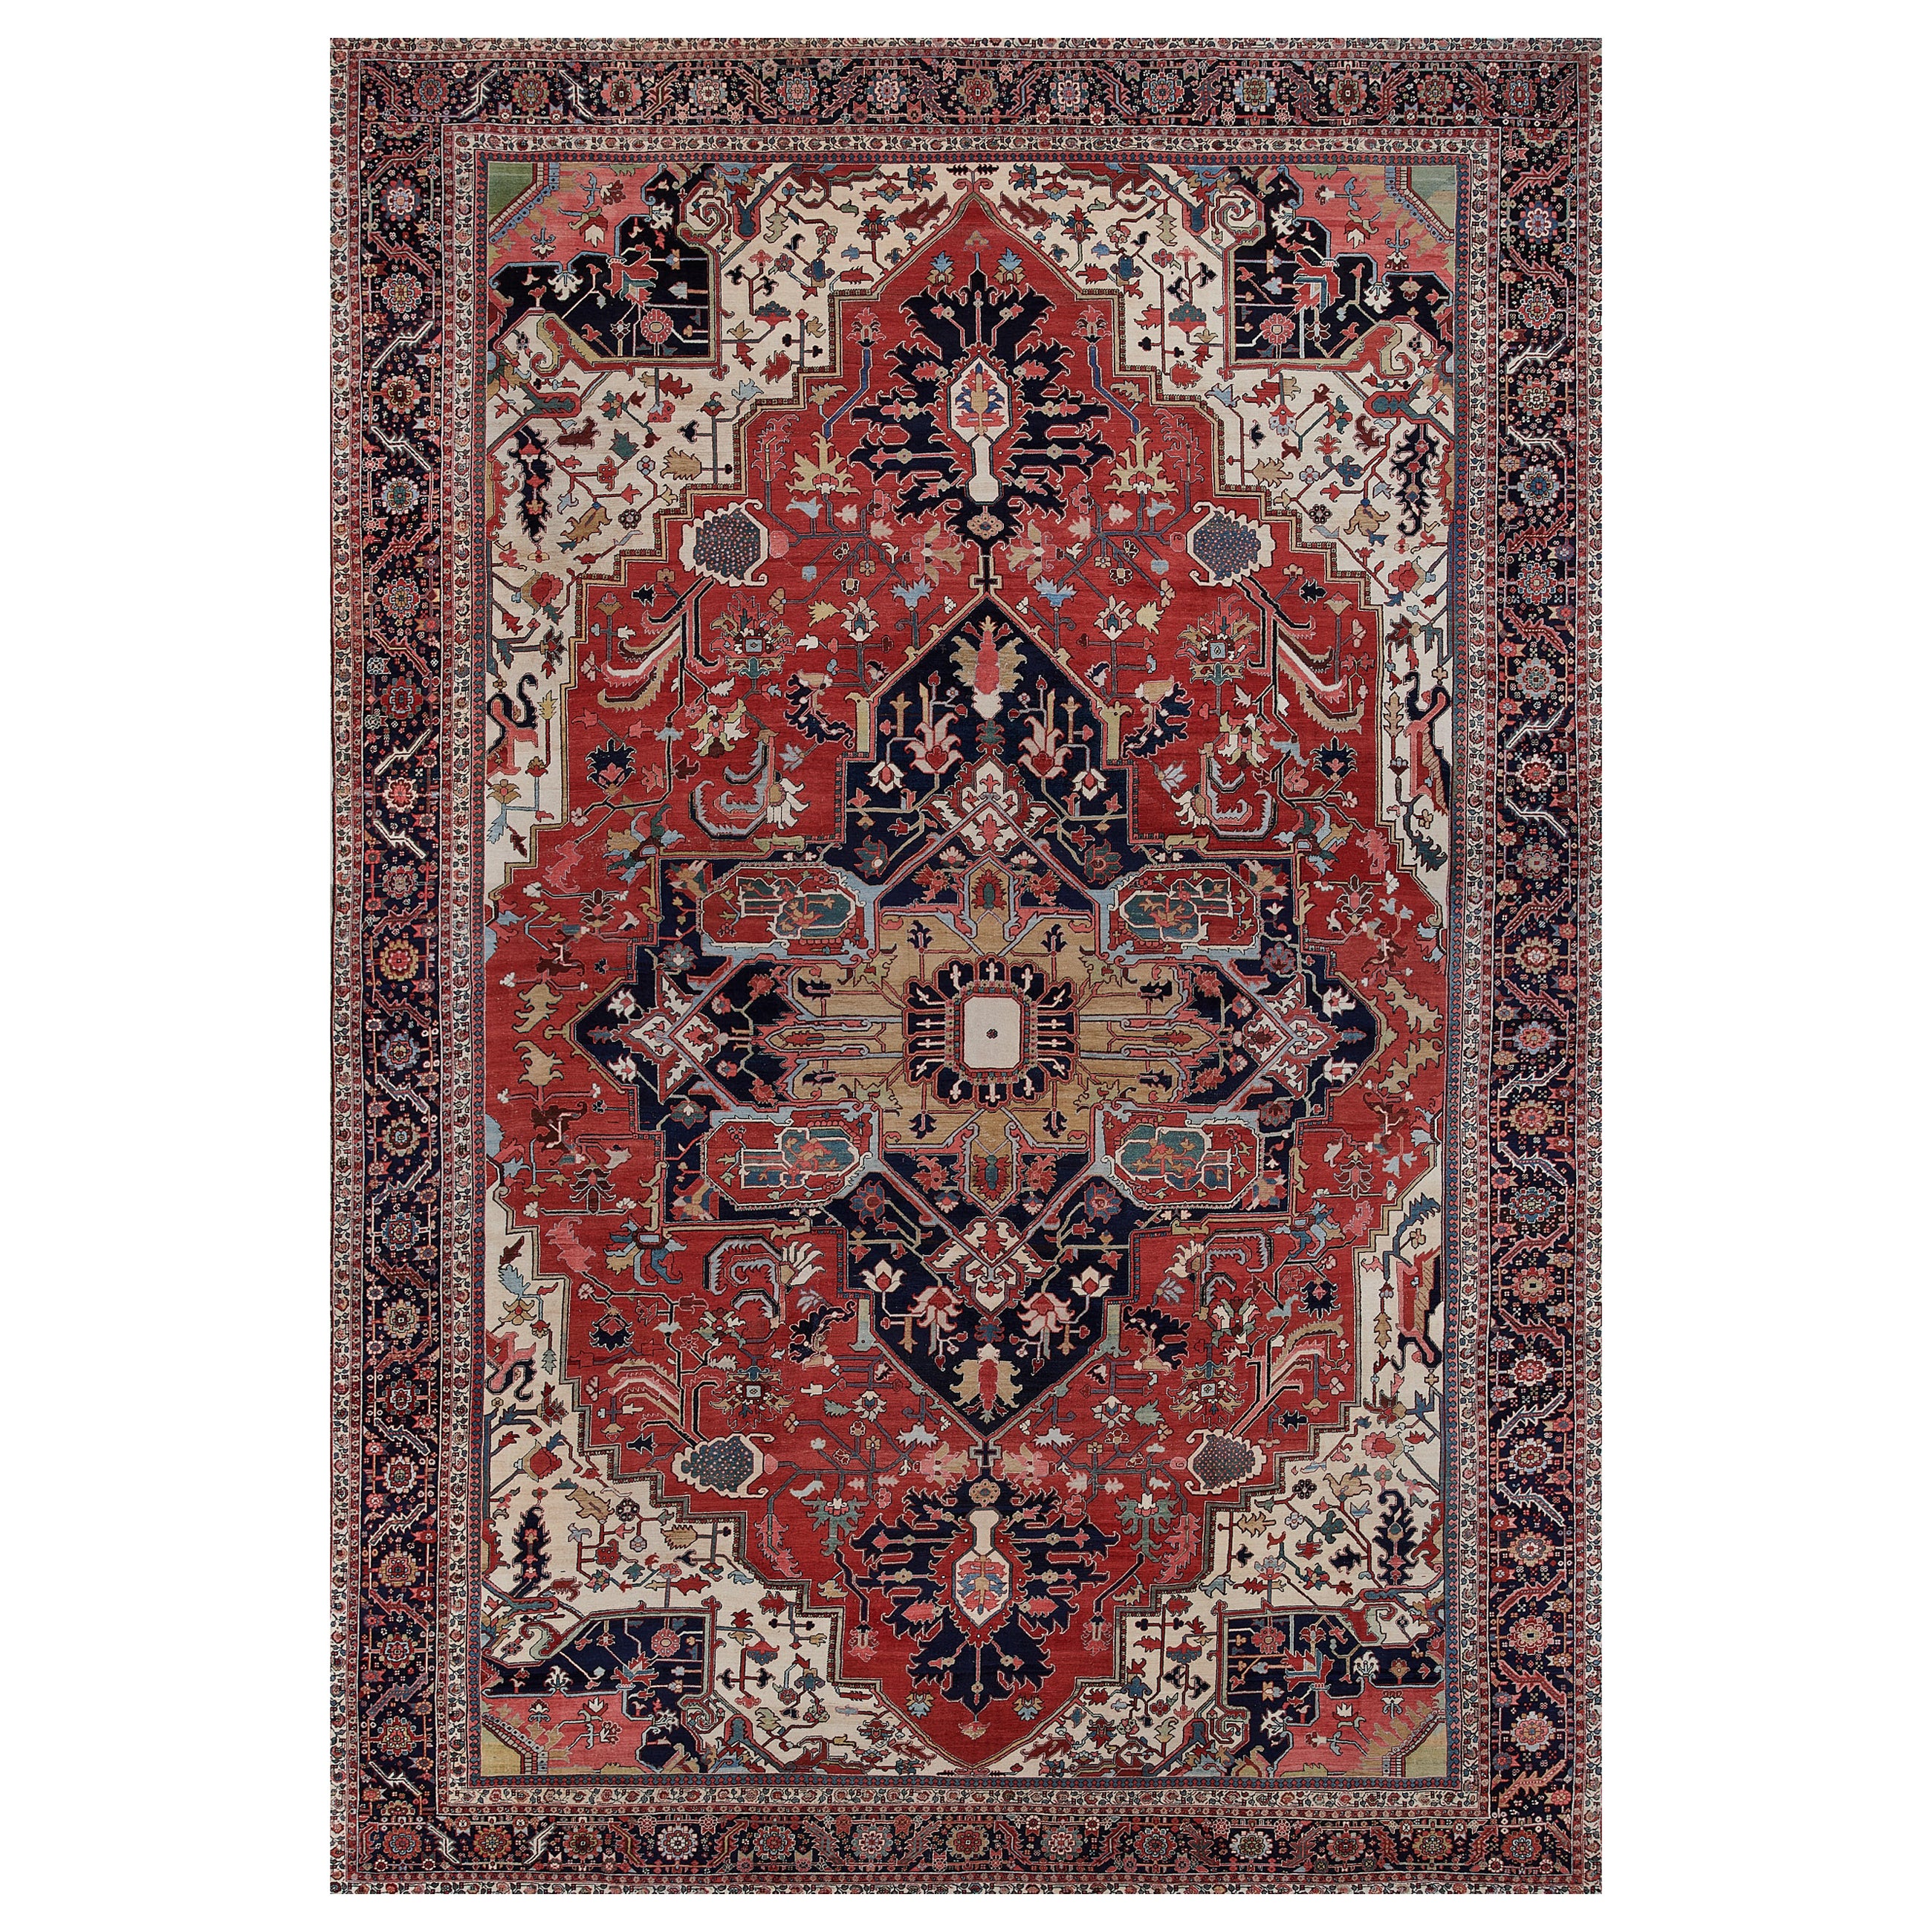 Rare Large-sized Traditional Hand-woven Wool Persian Serapi Rug For Sale